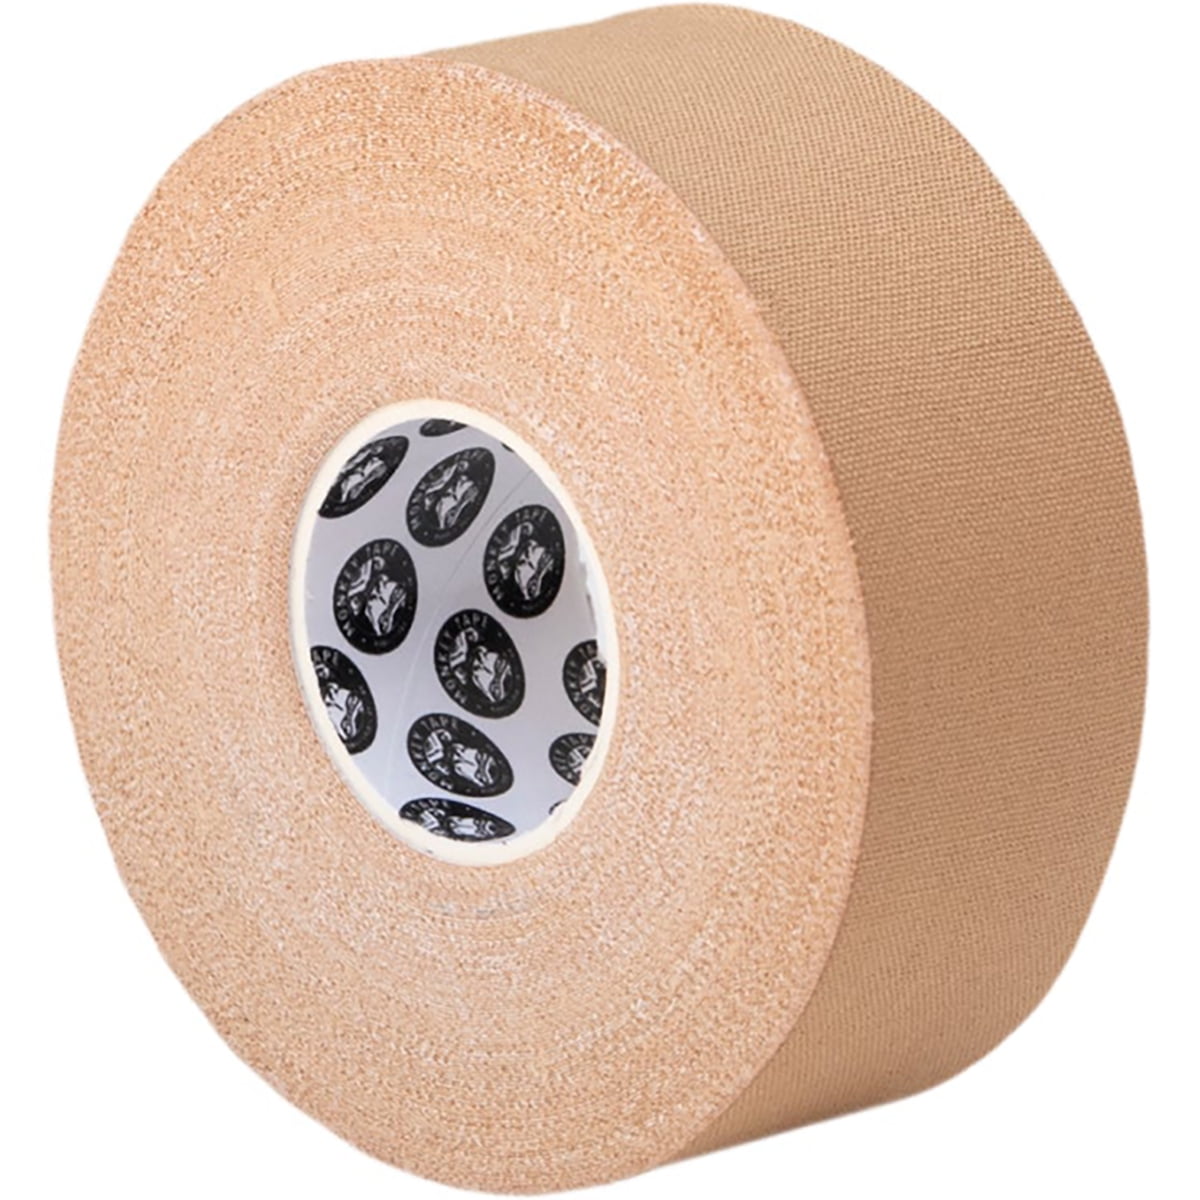 Meister Premium Mat Tape for Wrestling Grappling and Exercise Mats - Clear - 4 x 84ft - 1 Roll